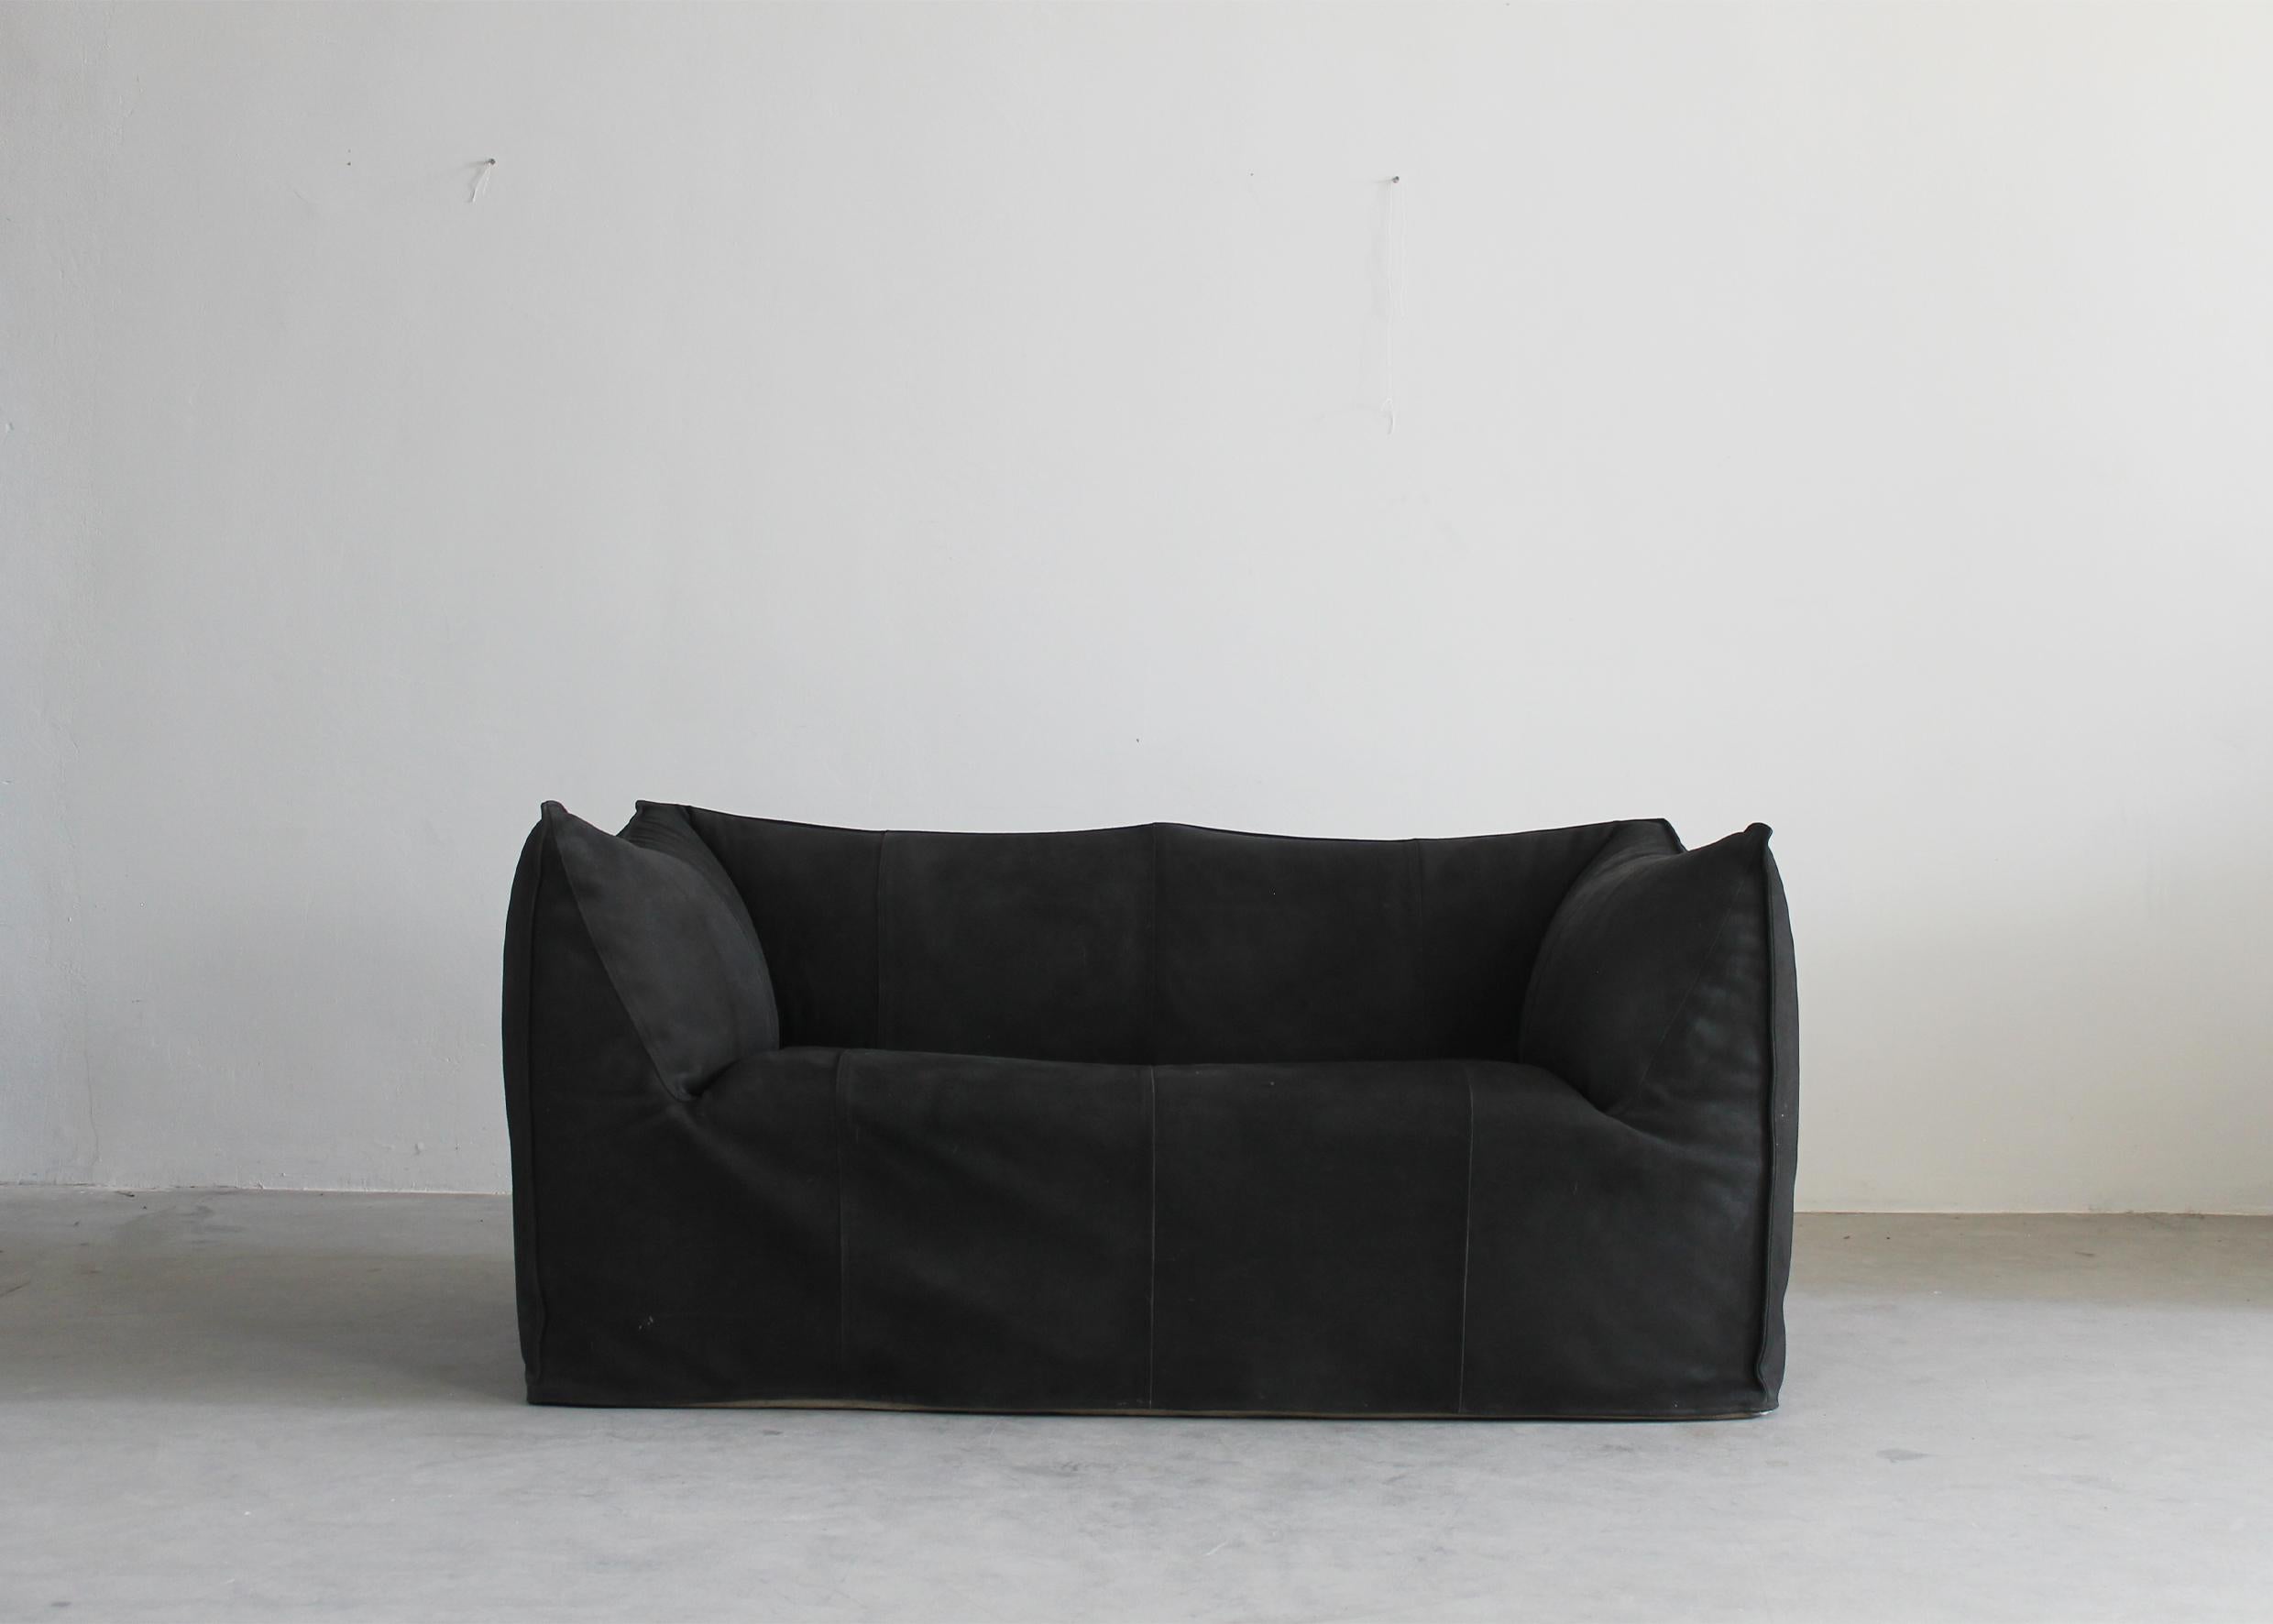 The iconic Le Bambole sofa (two.-seater) in black padded suede designed by Mario Bellini for B&B Italia 1972.

Le Bambole sofa is an icon of the Seventies and winner of the Compasso d’Oro in 1979.
Designed by 35-year-old Mario Bellini, this couch is